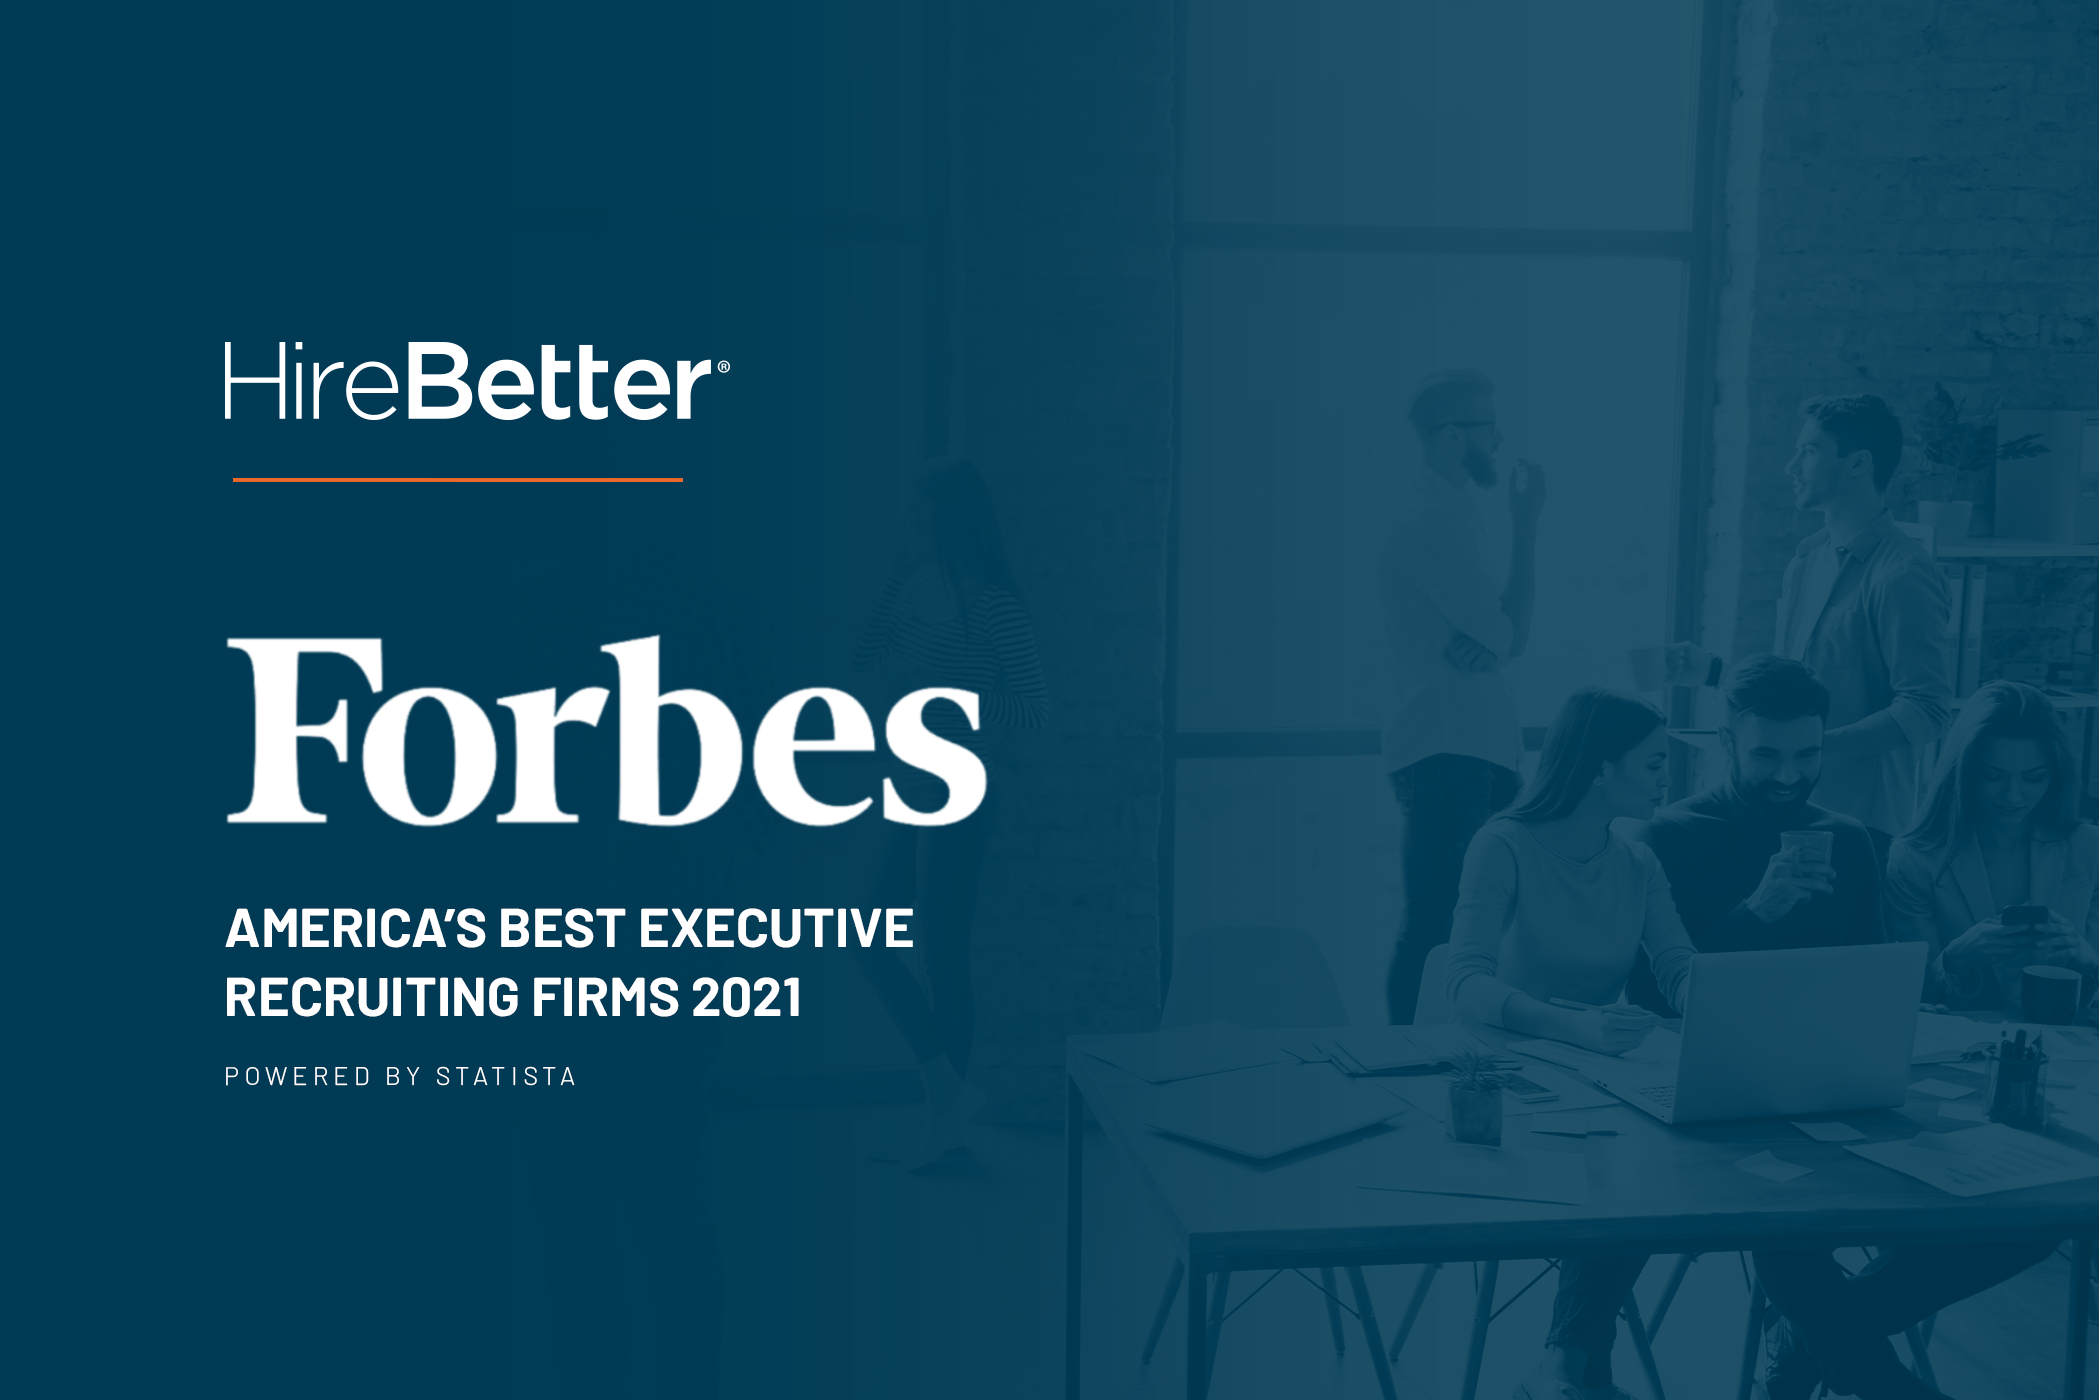 HireBetter recognized by Forbes on America's Best Executive Recruiting Firms 2021 List